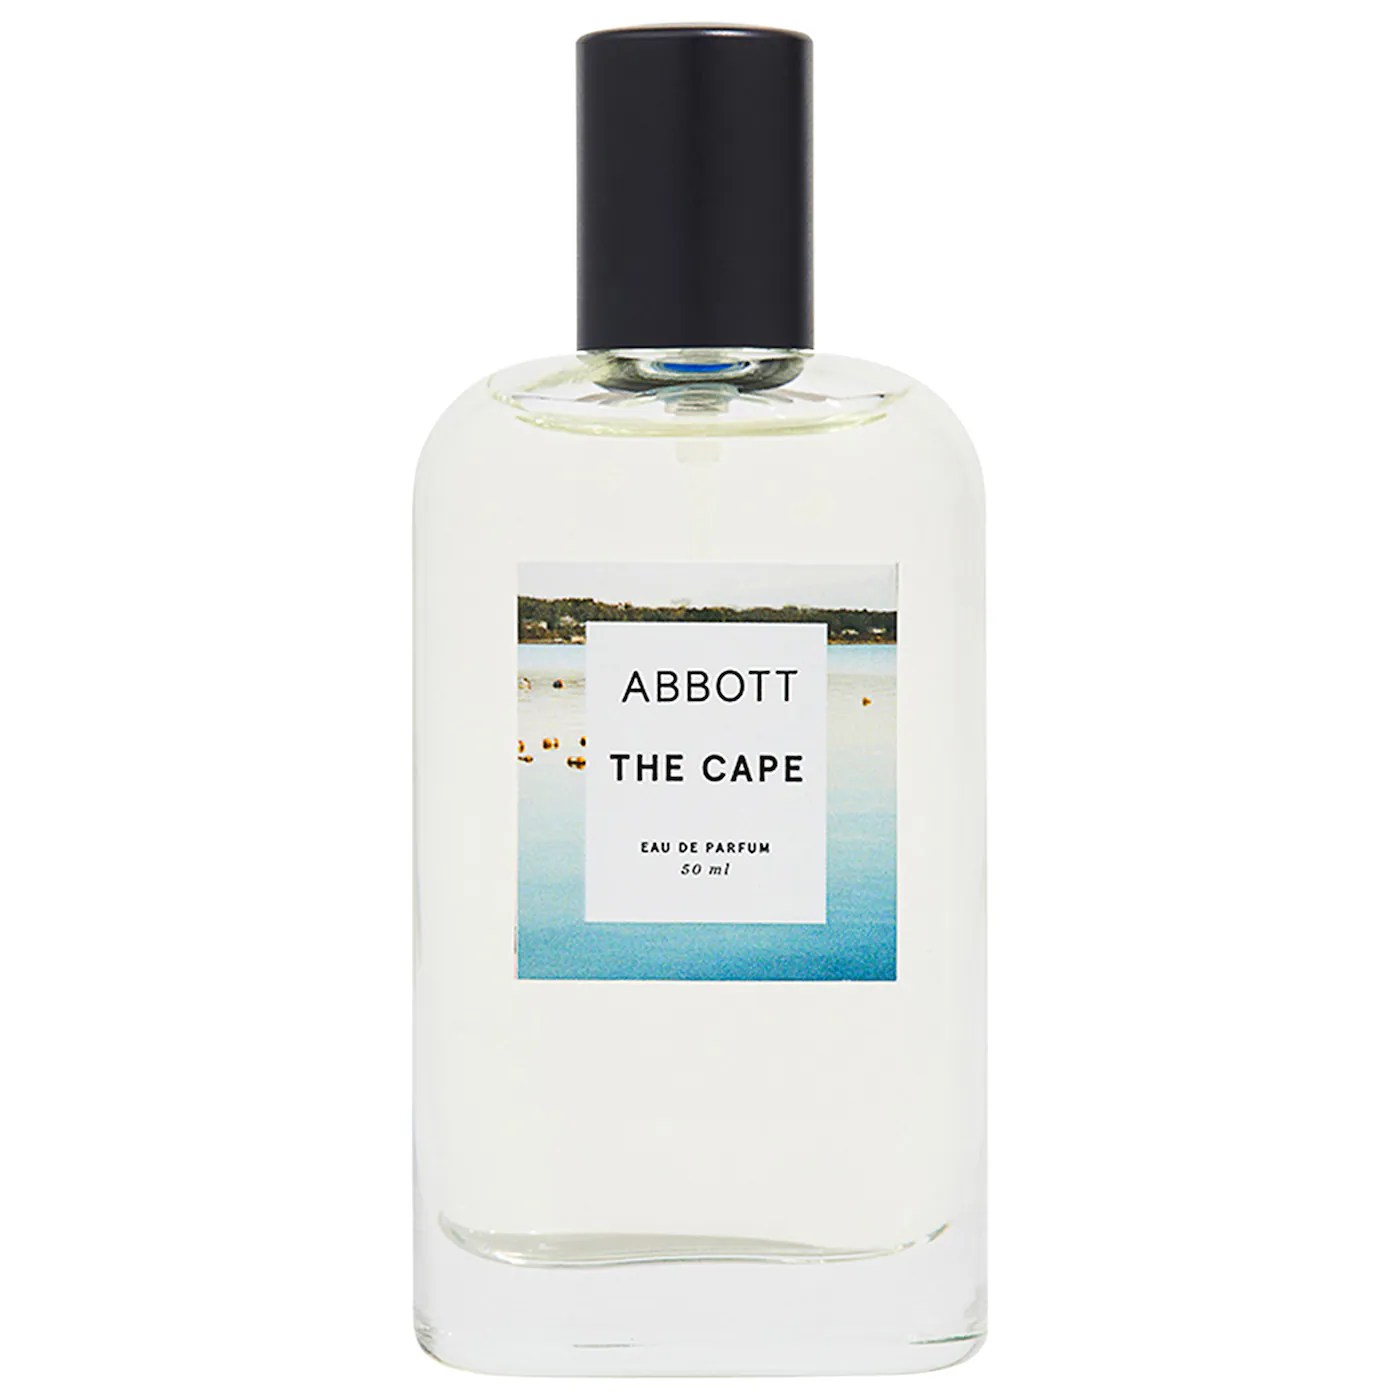 abbott the cape perfume, a vacation scent, on a white background